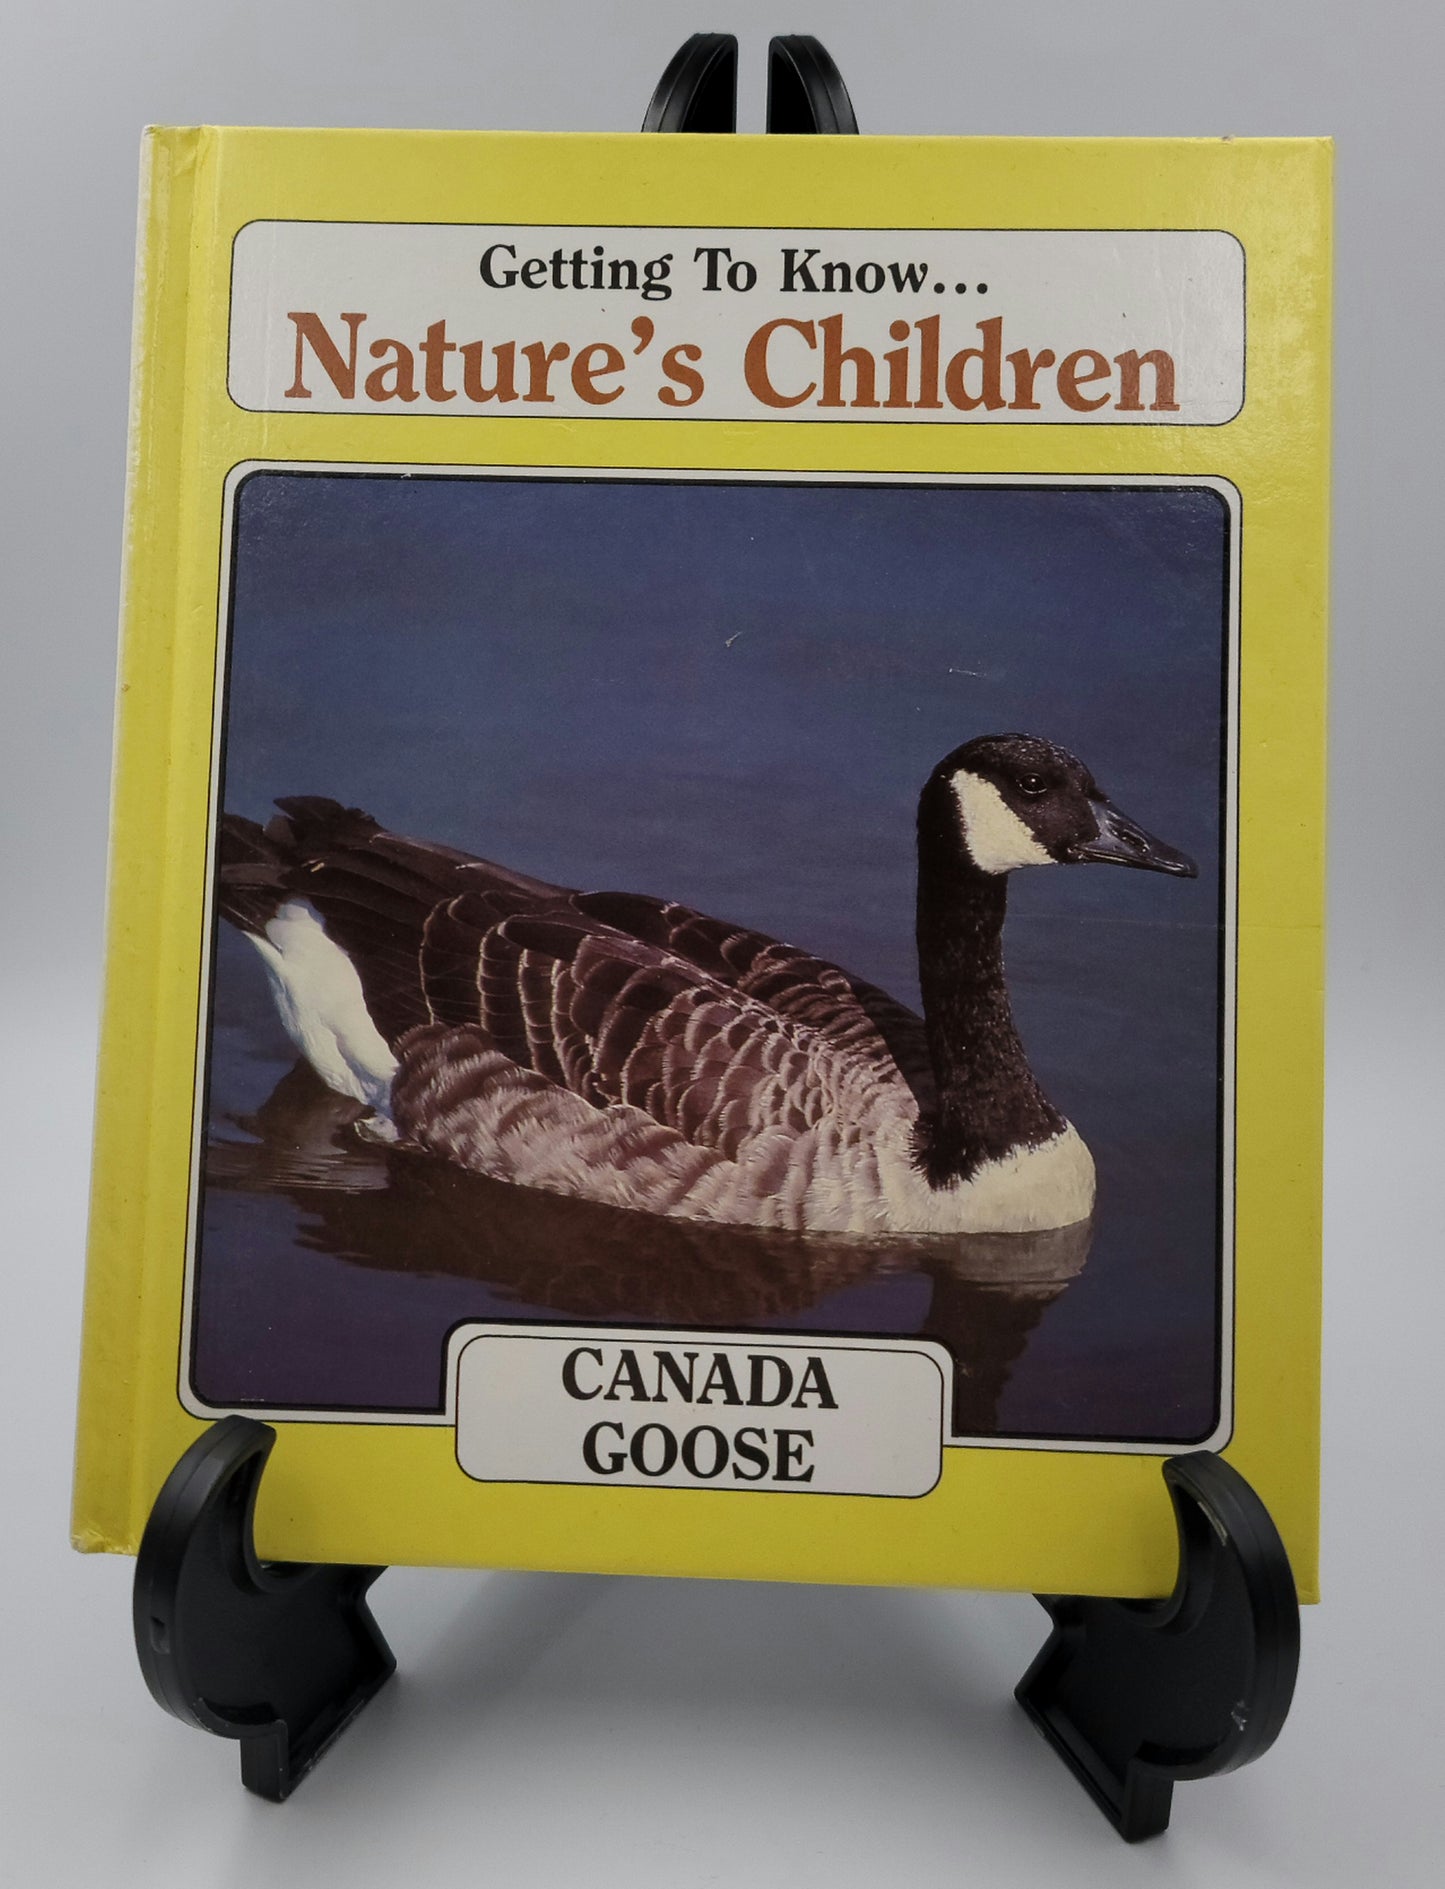 Canada Goose by Judy Ross and Grizzly Bears by Caroline Greenland (Getting to Know... Nature's Children #6)